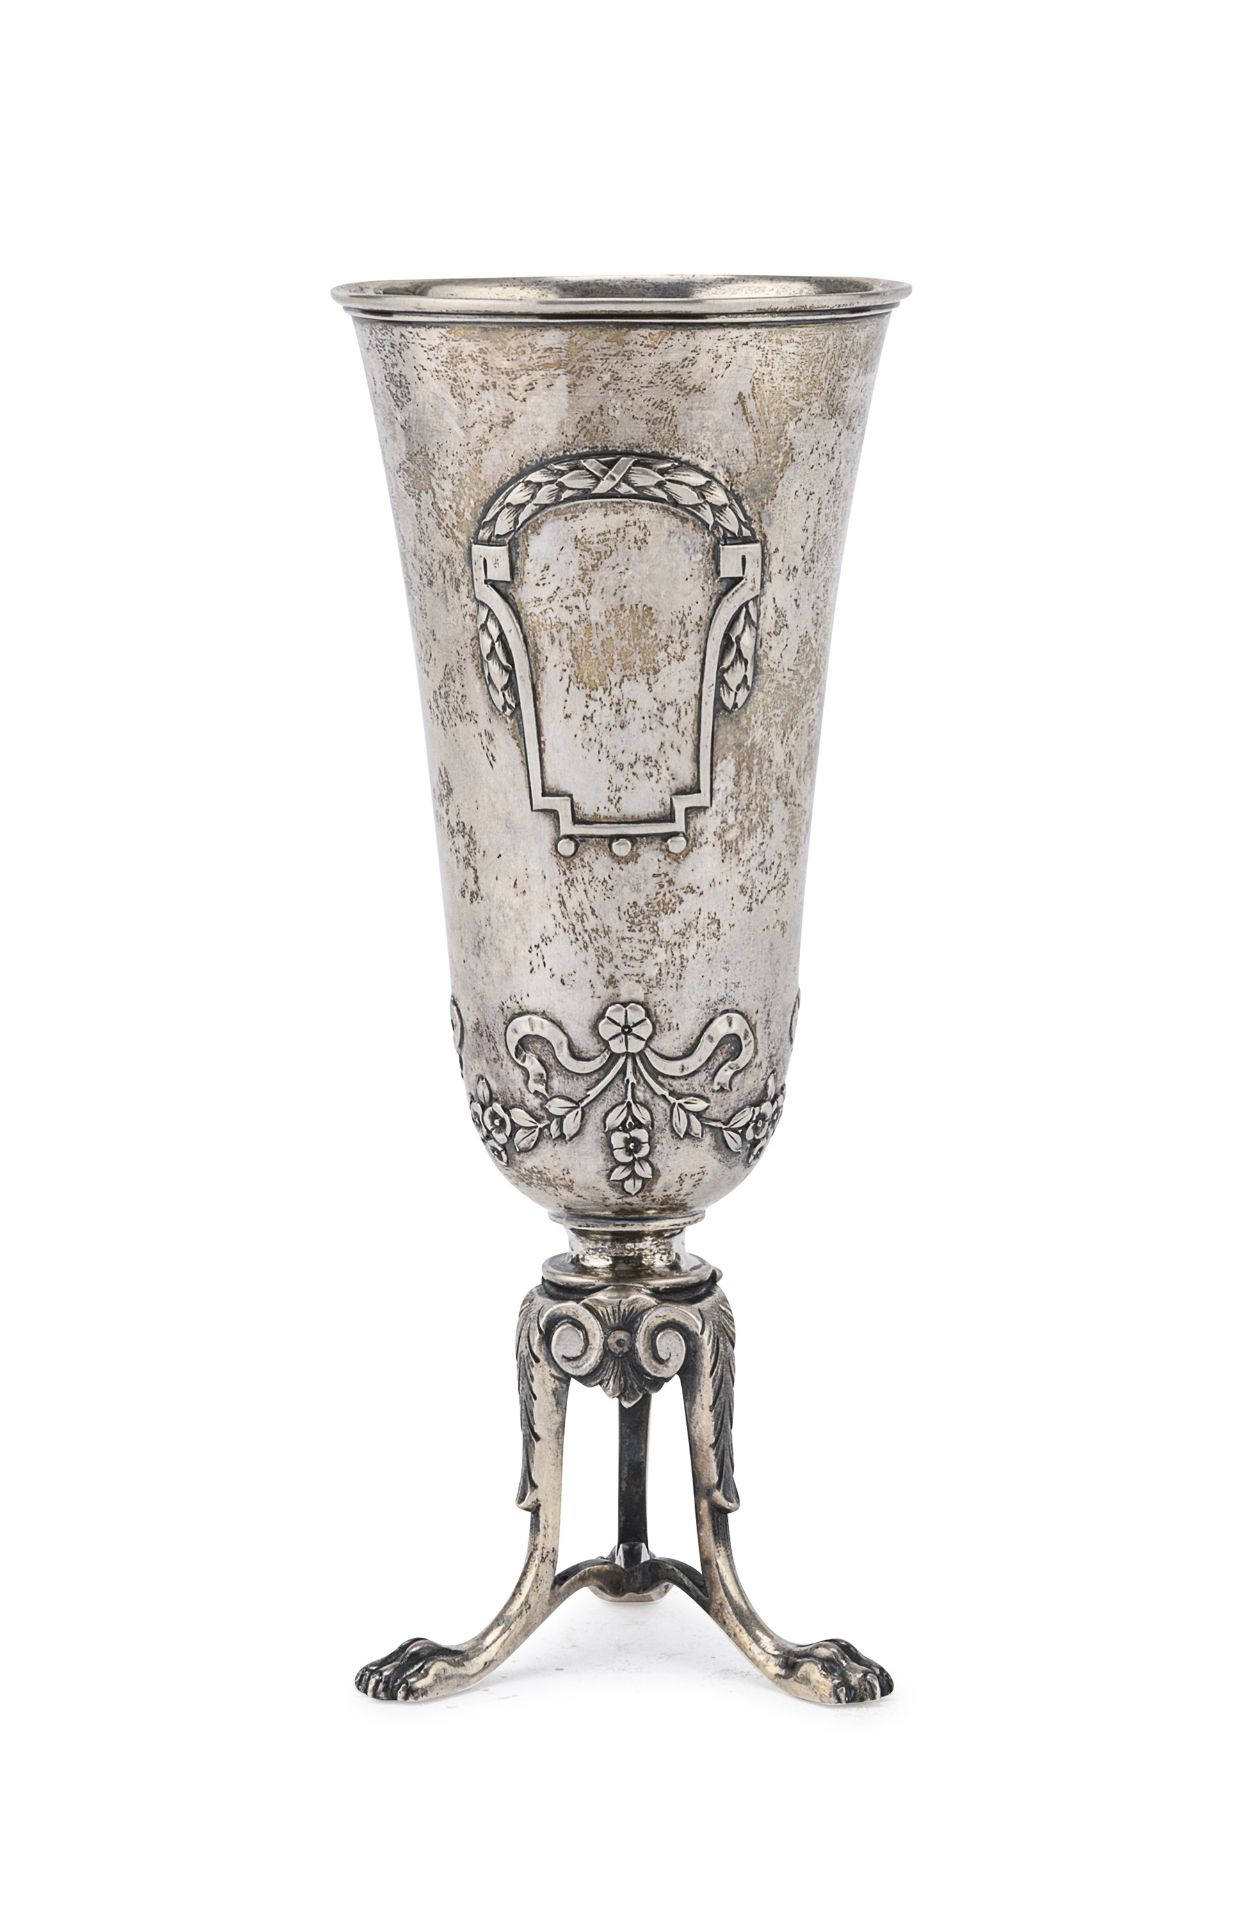 SILVER GOBLET AUSTRO-HUNGARIAN LATE 19TH CENTURY